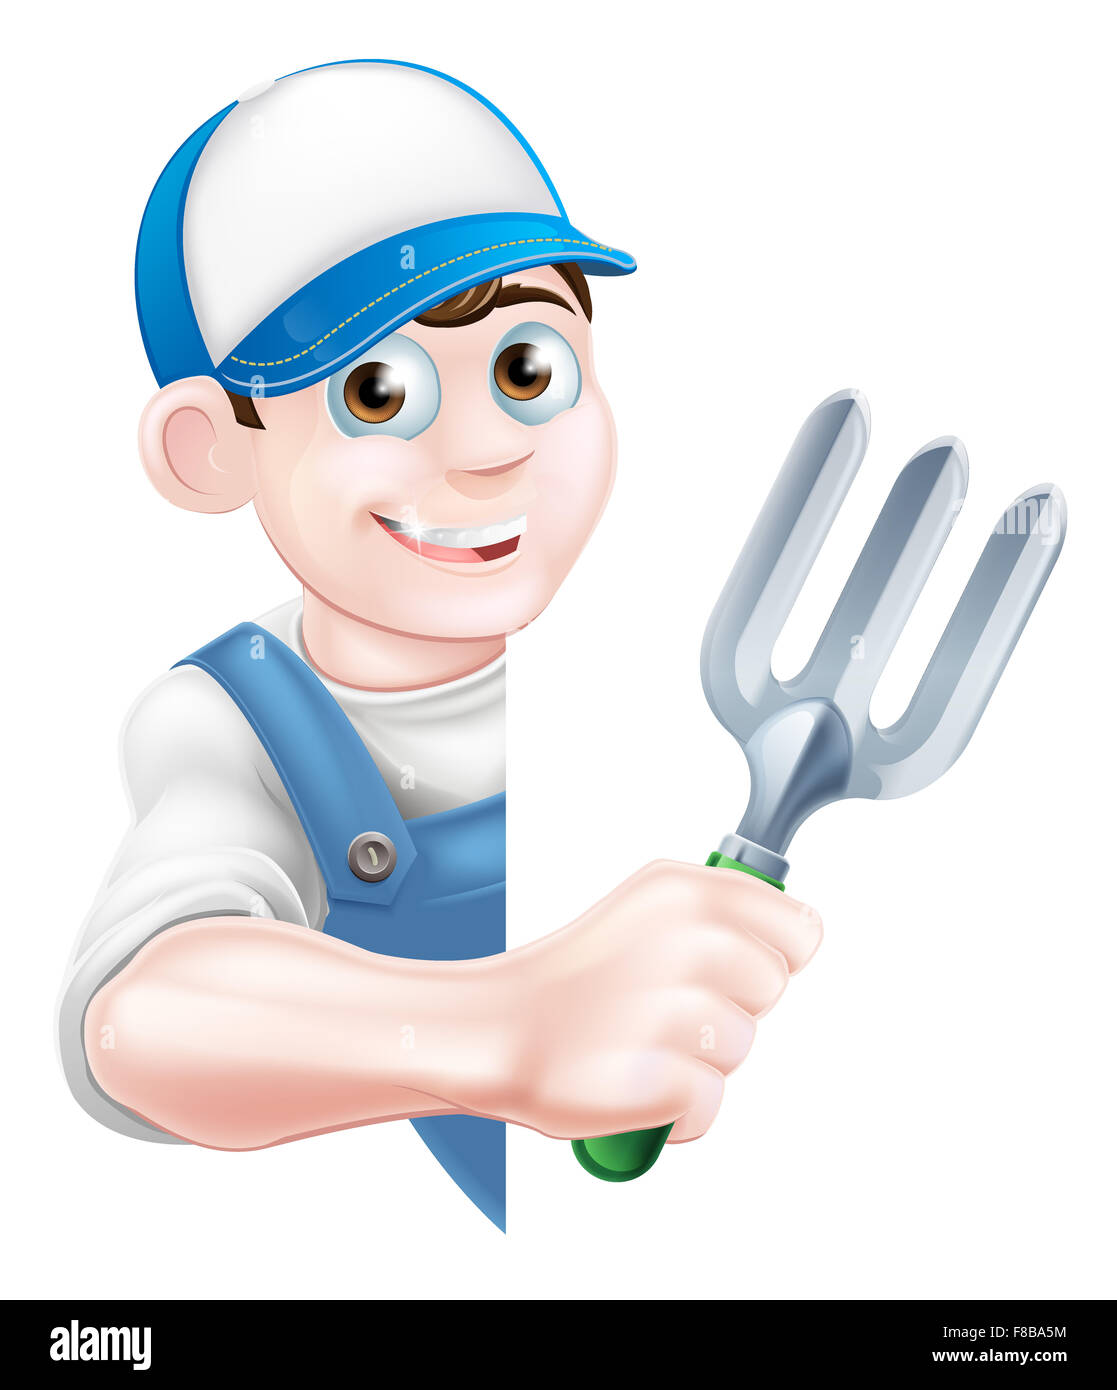 Cartoon gardener character in a cap and blue dungarees holding a garden fork tool peeking around a sign Stock Photo